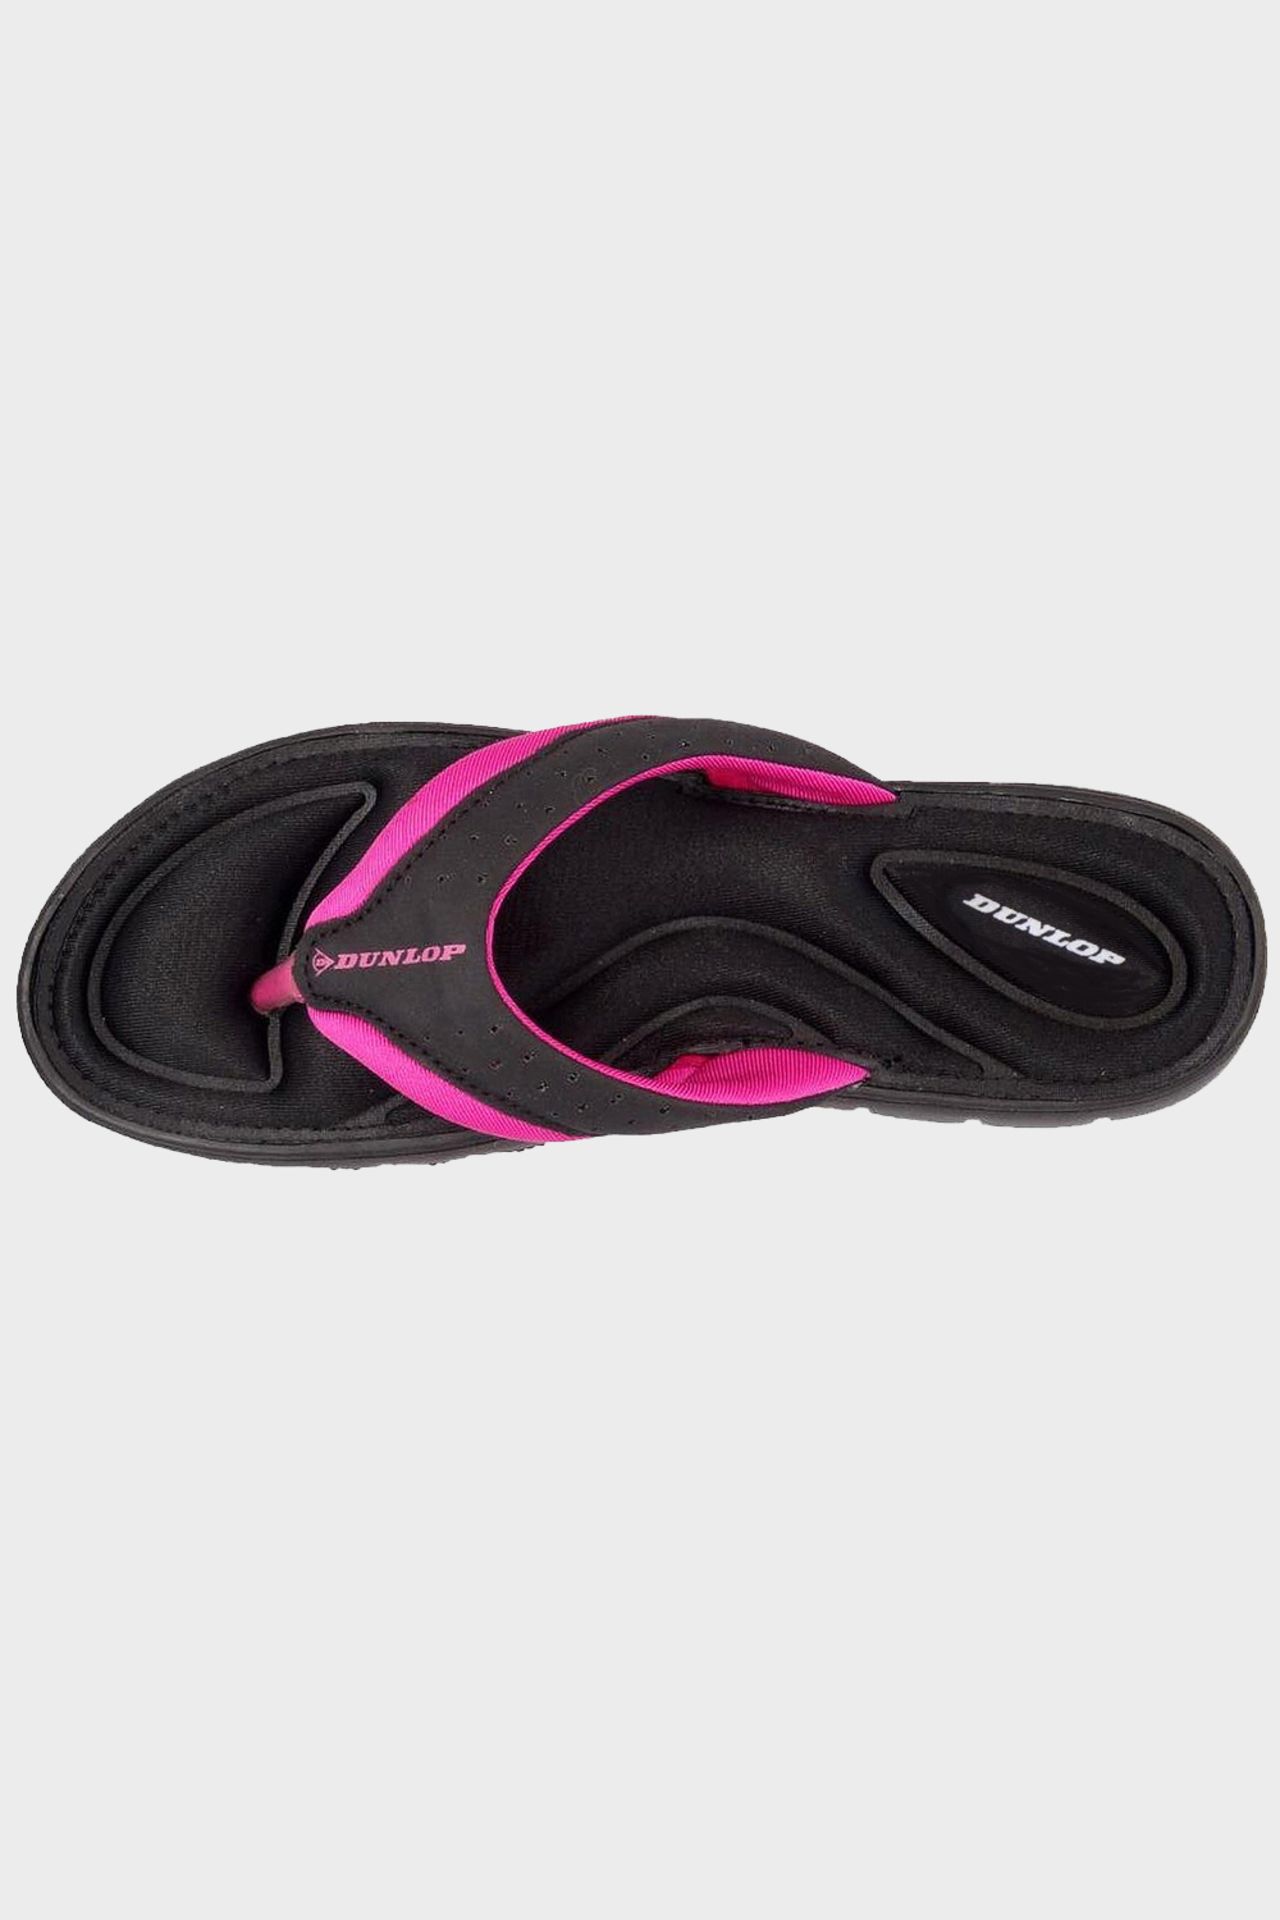 22 X BRAND NEW DUNLOP MEMORY FOAM FLIP FLOPS IN BLACK / PINK - IN MIXED SIZES TO INCLUDE UK 5 / UK 7 - Image 2 of 2